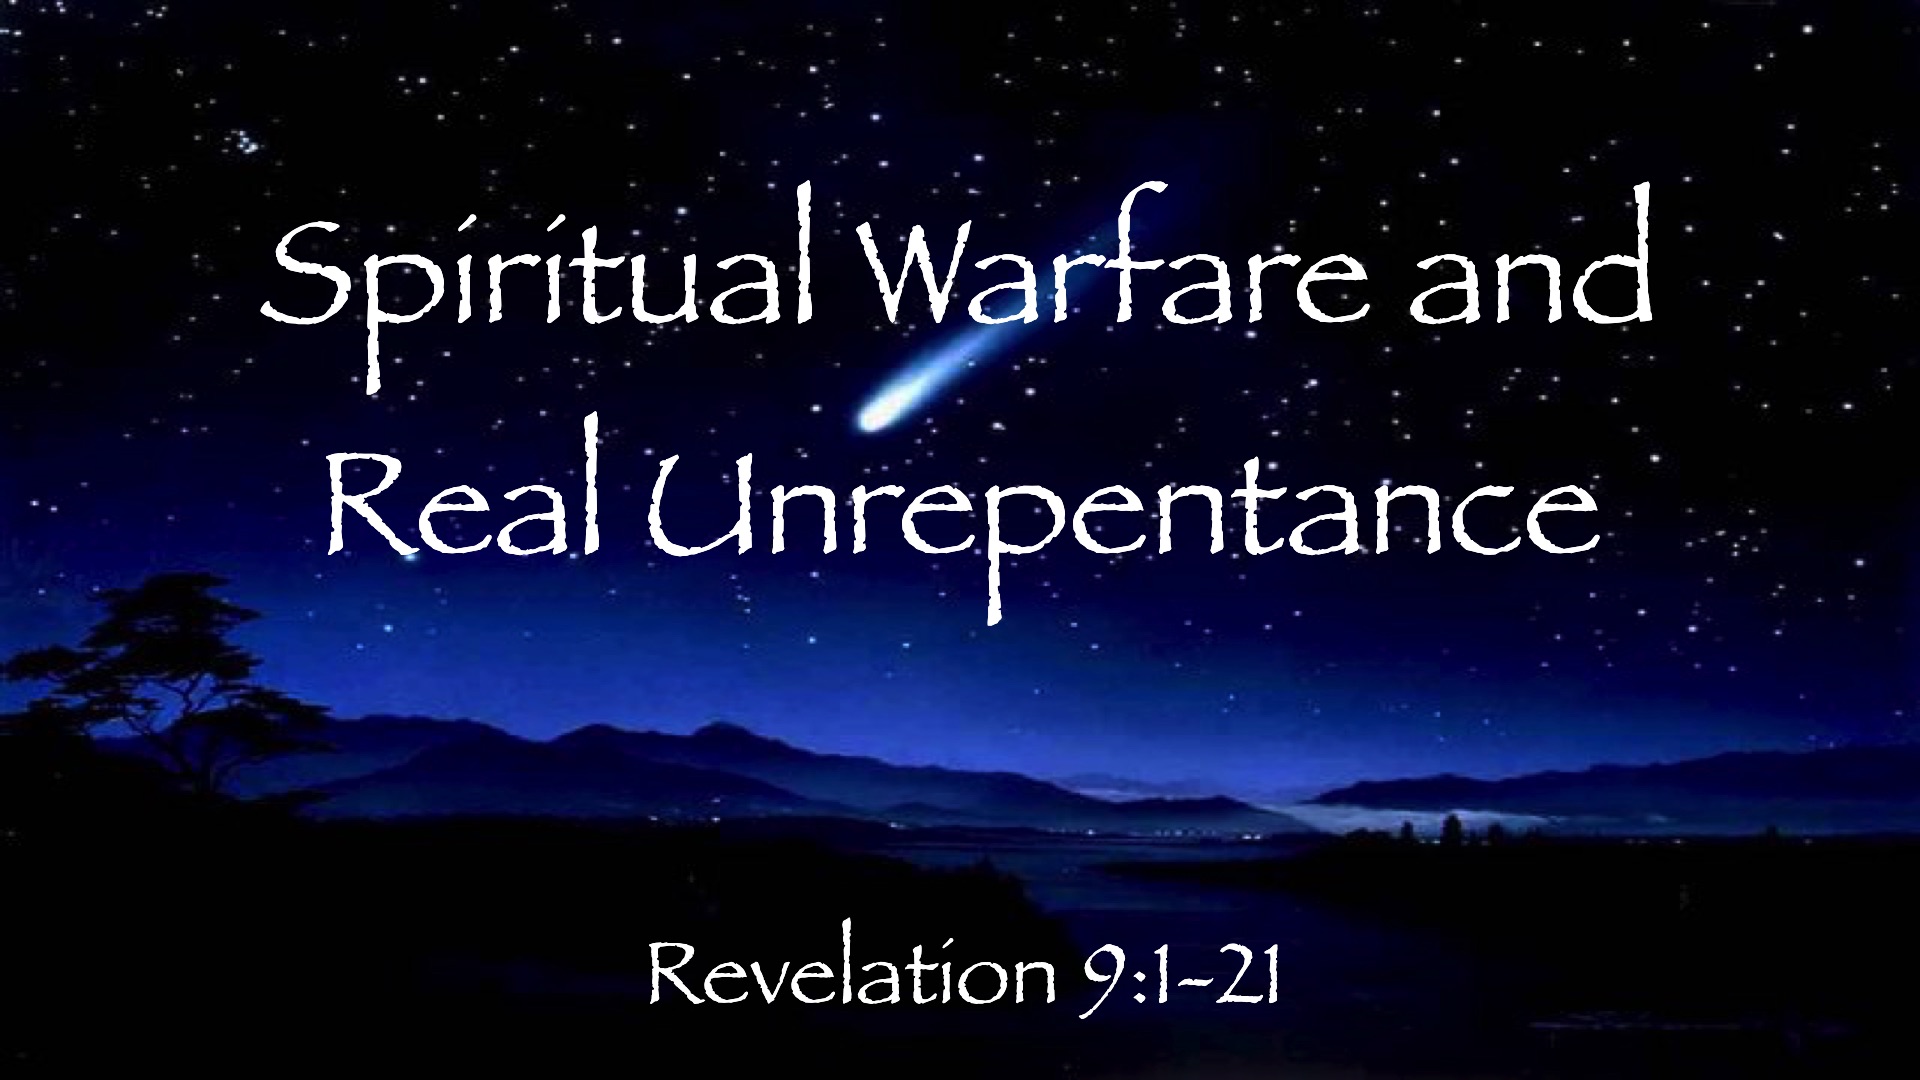 “The Book of Revelation: Spiritual Warfare and Real Unrepentance”